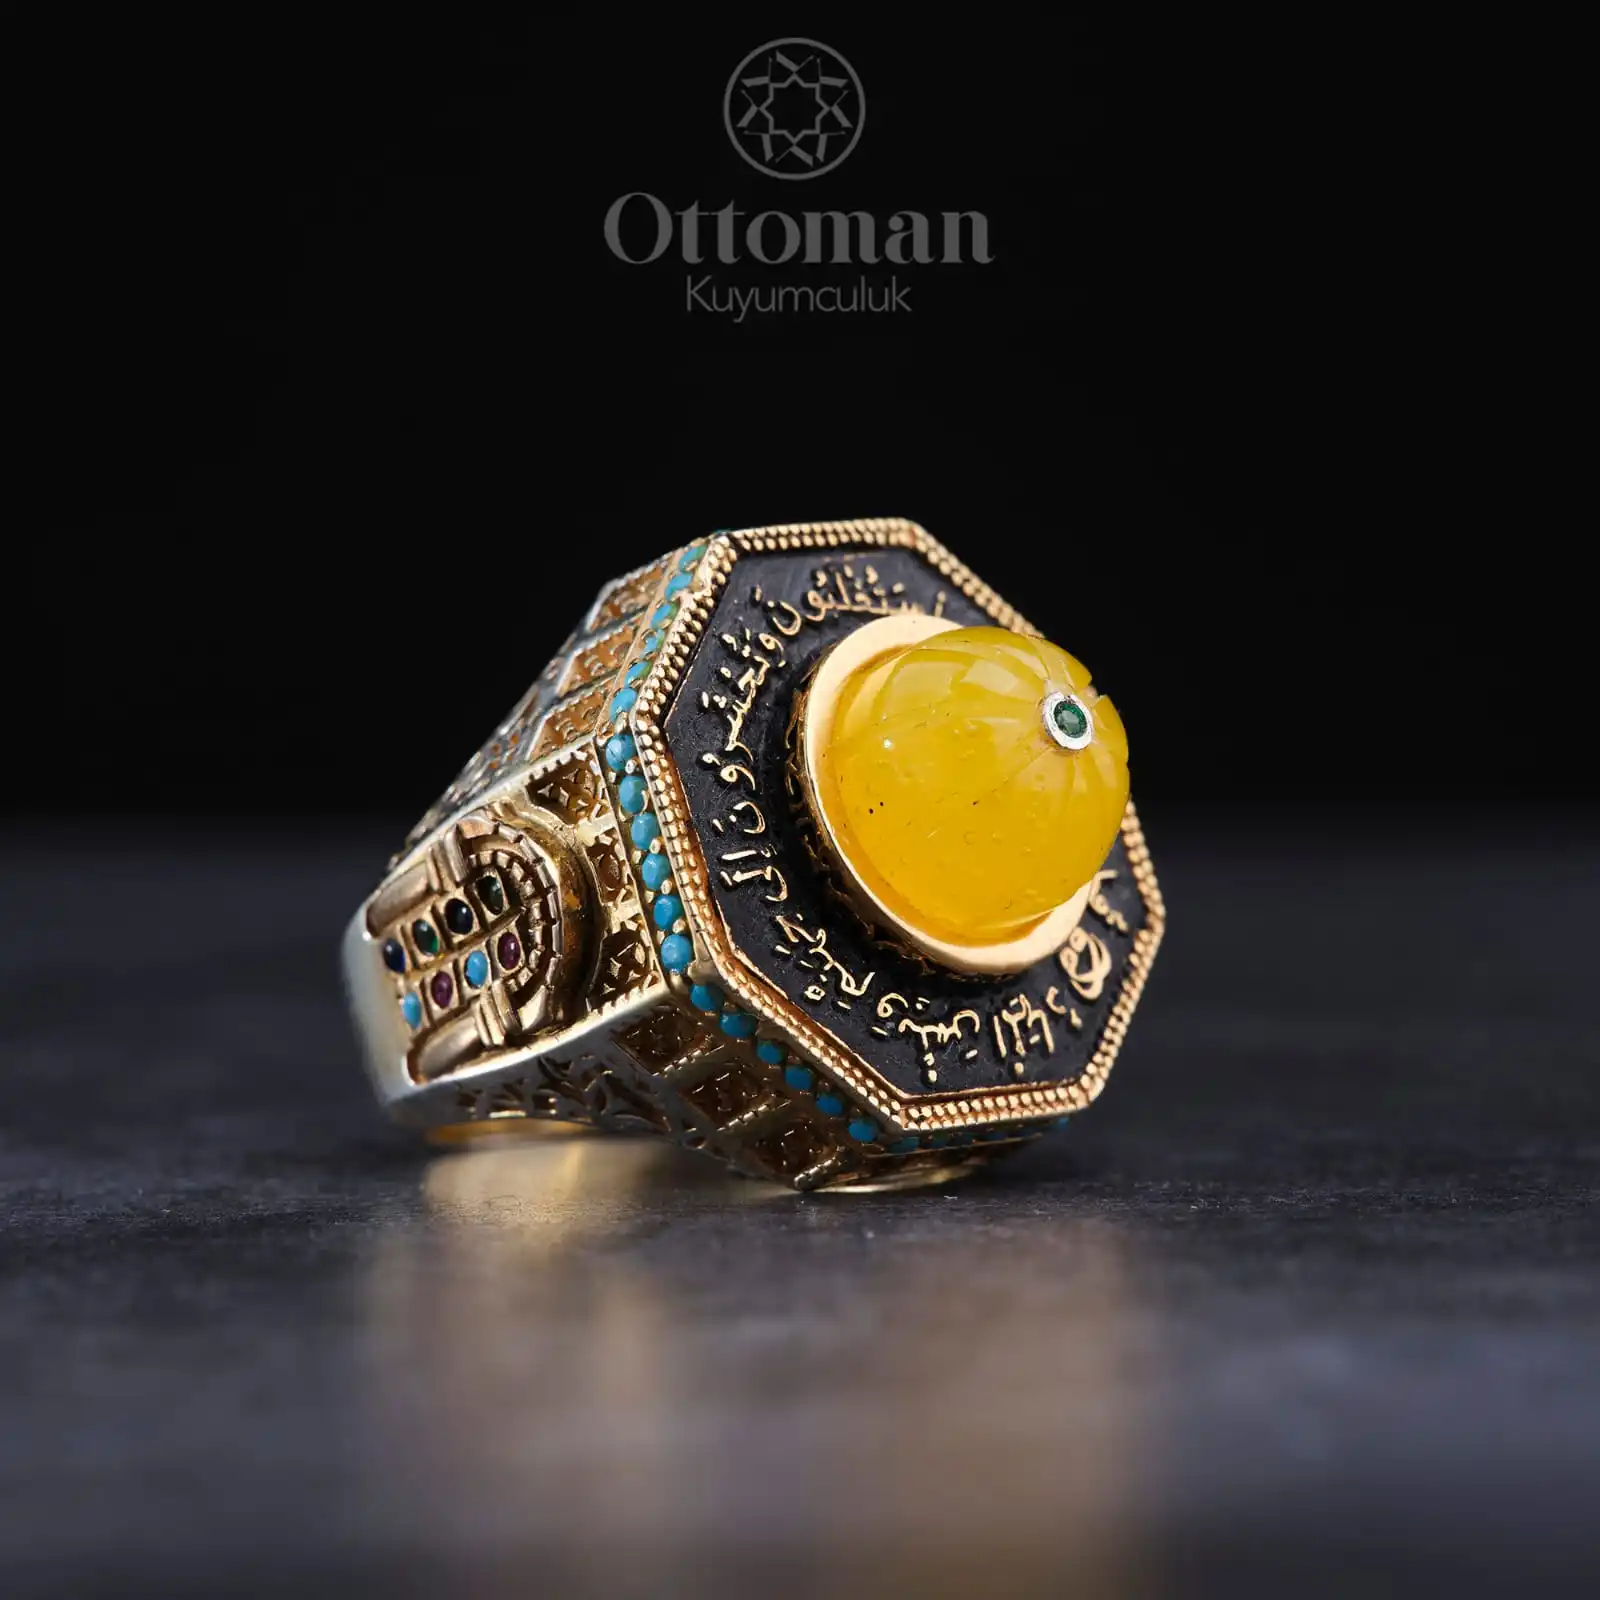 Holy Safety Jerusalem Silver Men's Ring with Amber Stone, Kubbetül Sahara Embroidered Custom Ring, Catalan Amber Stone Ring